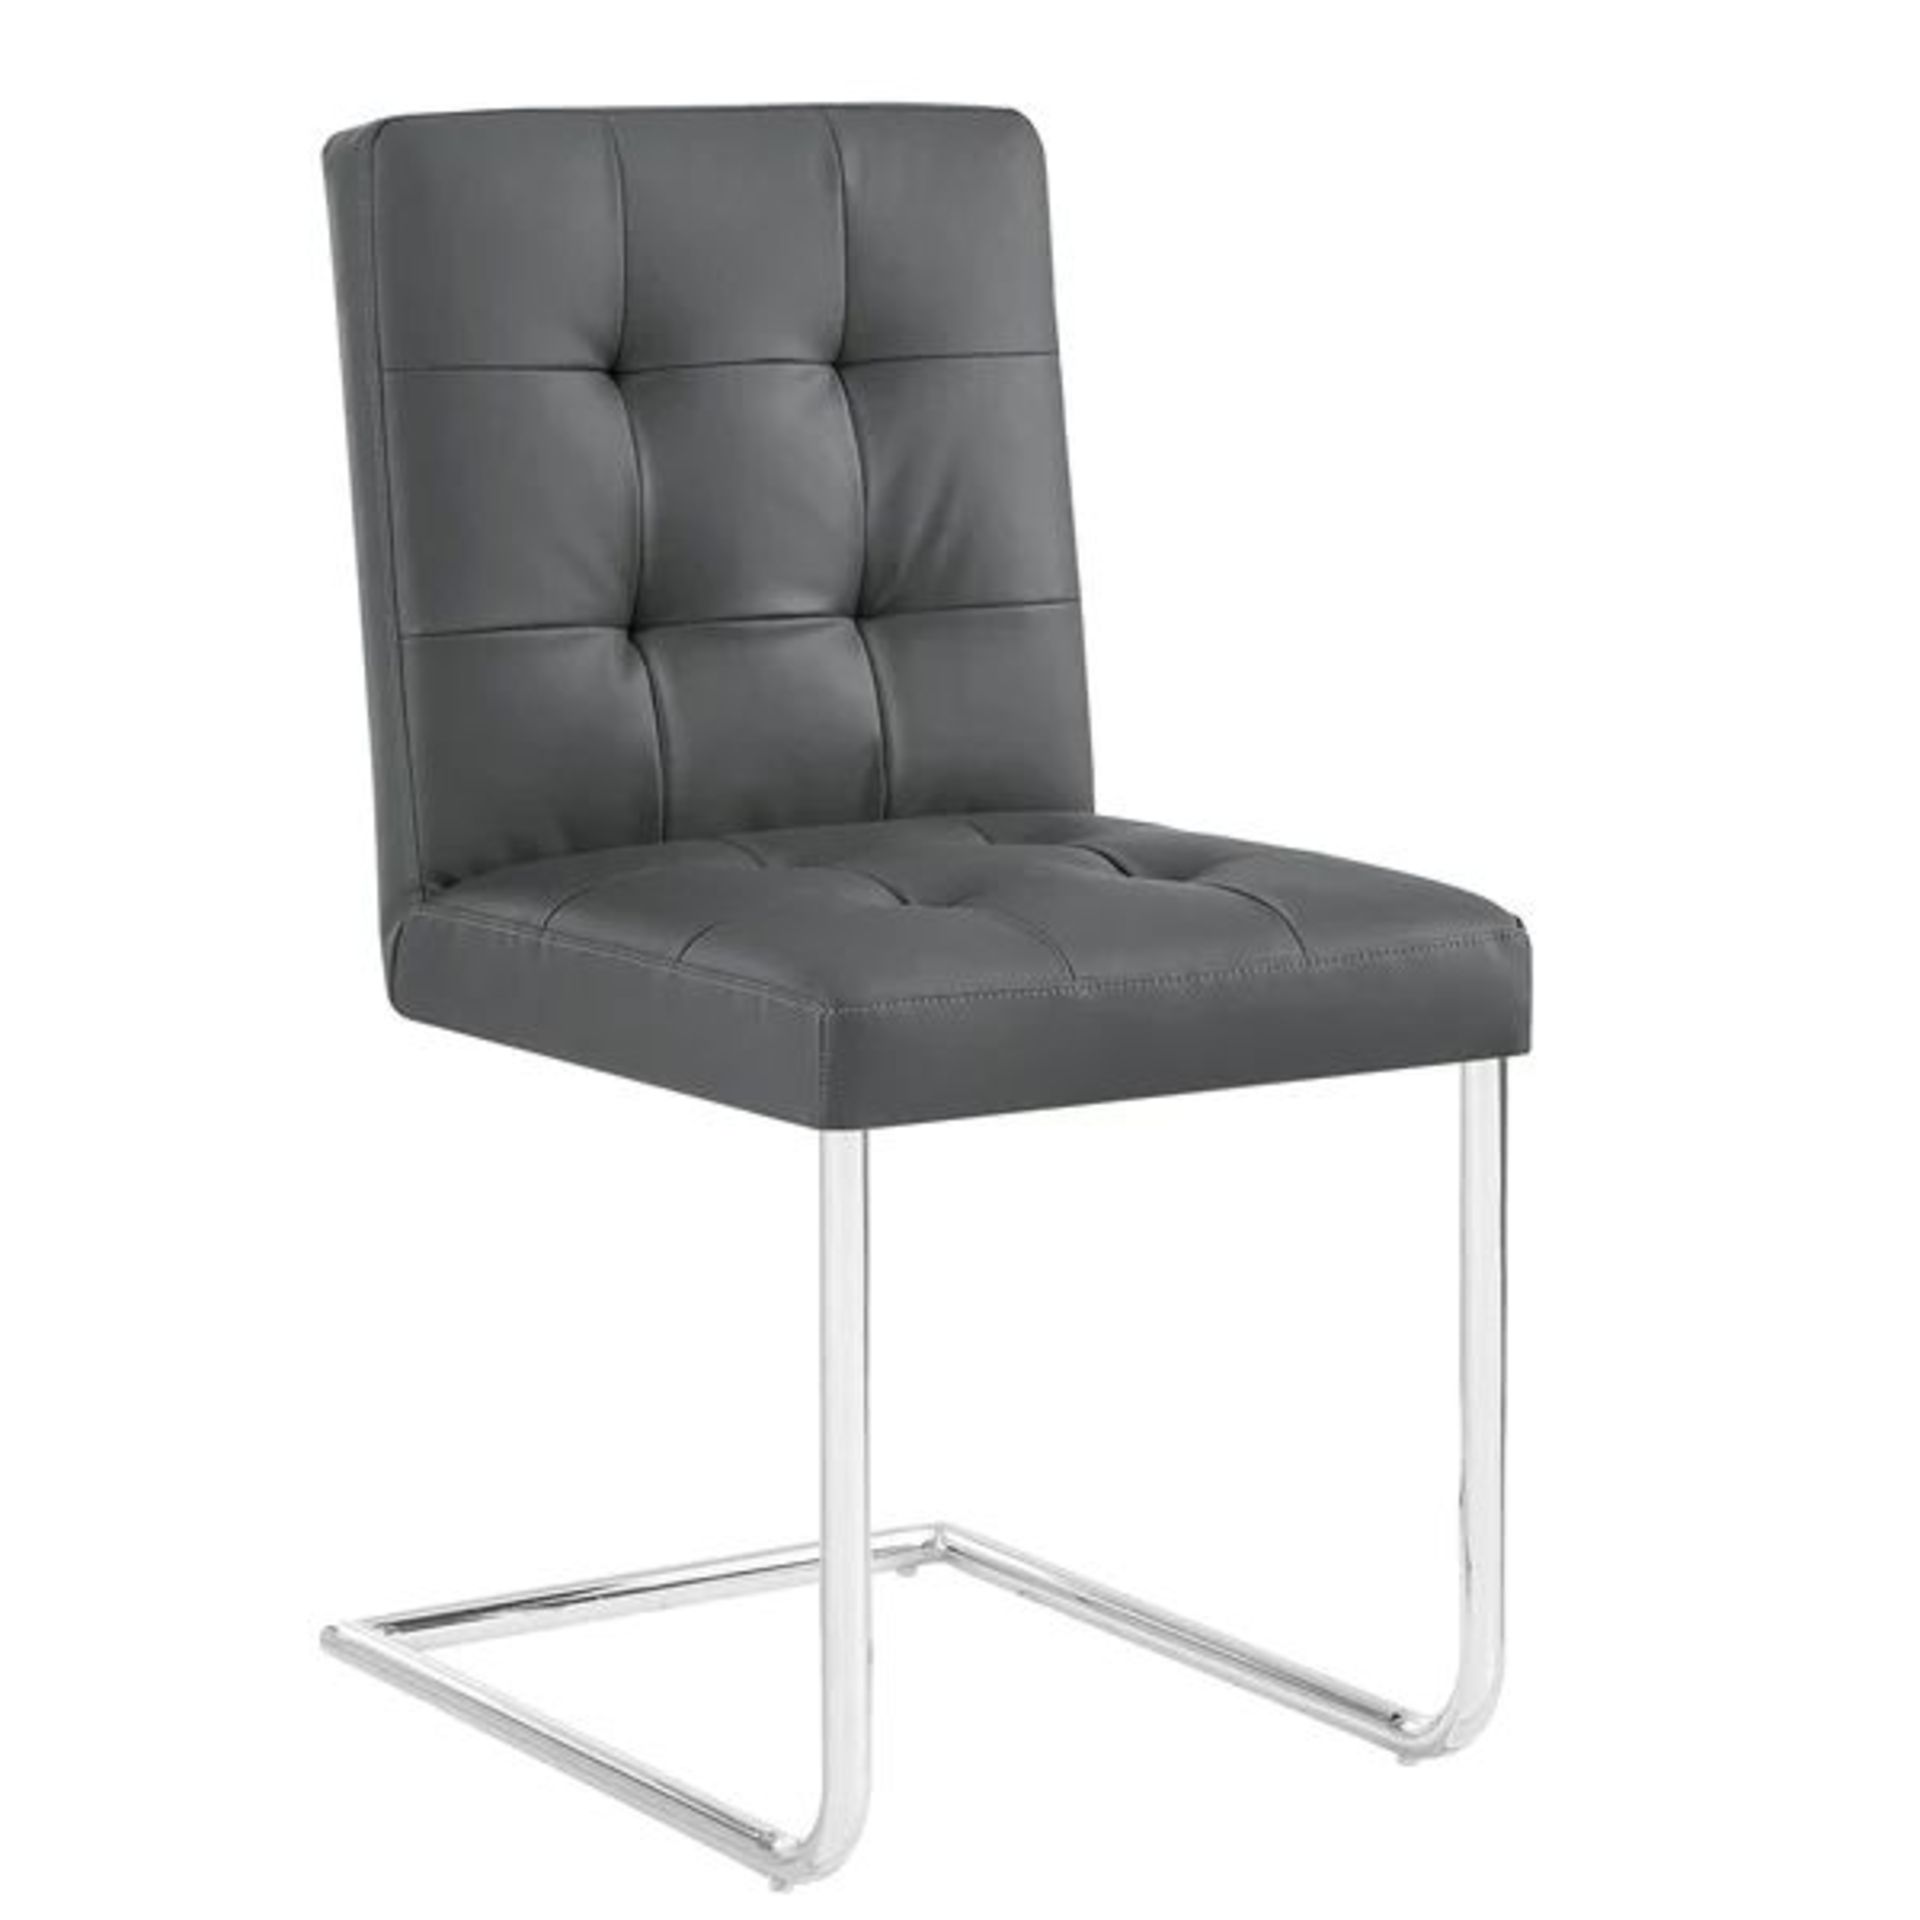 Keyston Set of 2 Dark Grey PU Leather Upholstered Dining Chairs with Chrome Legs. - R19.5. RRP £ - Image 2 of 2